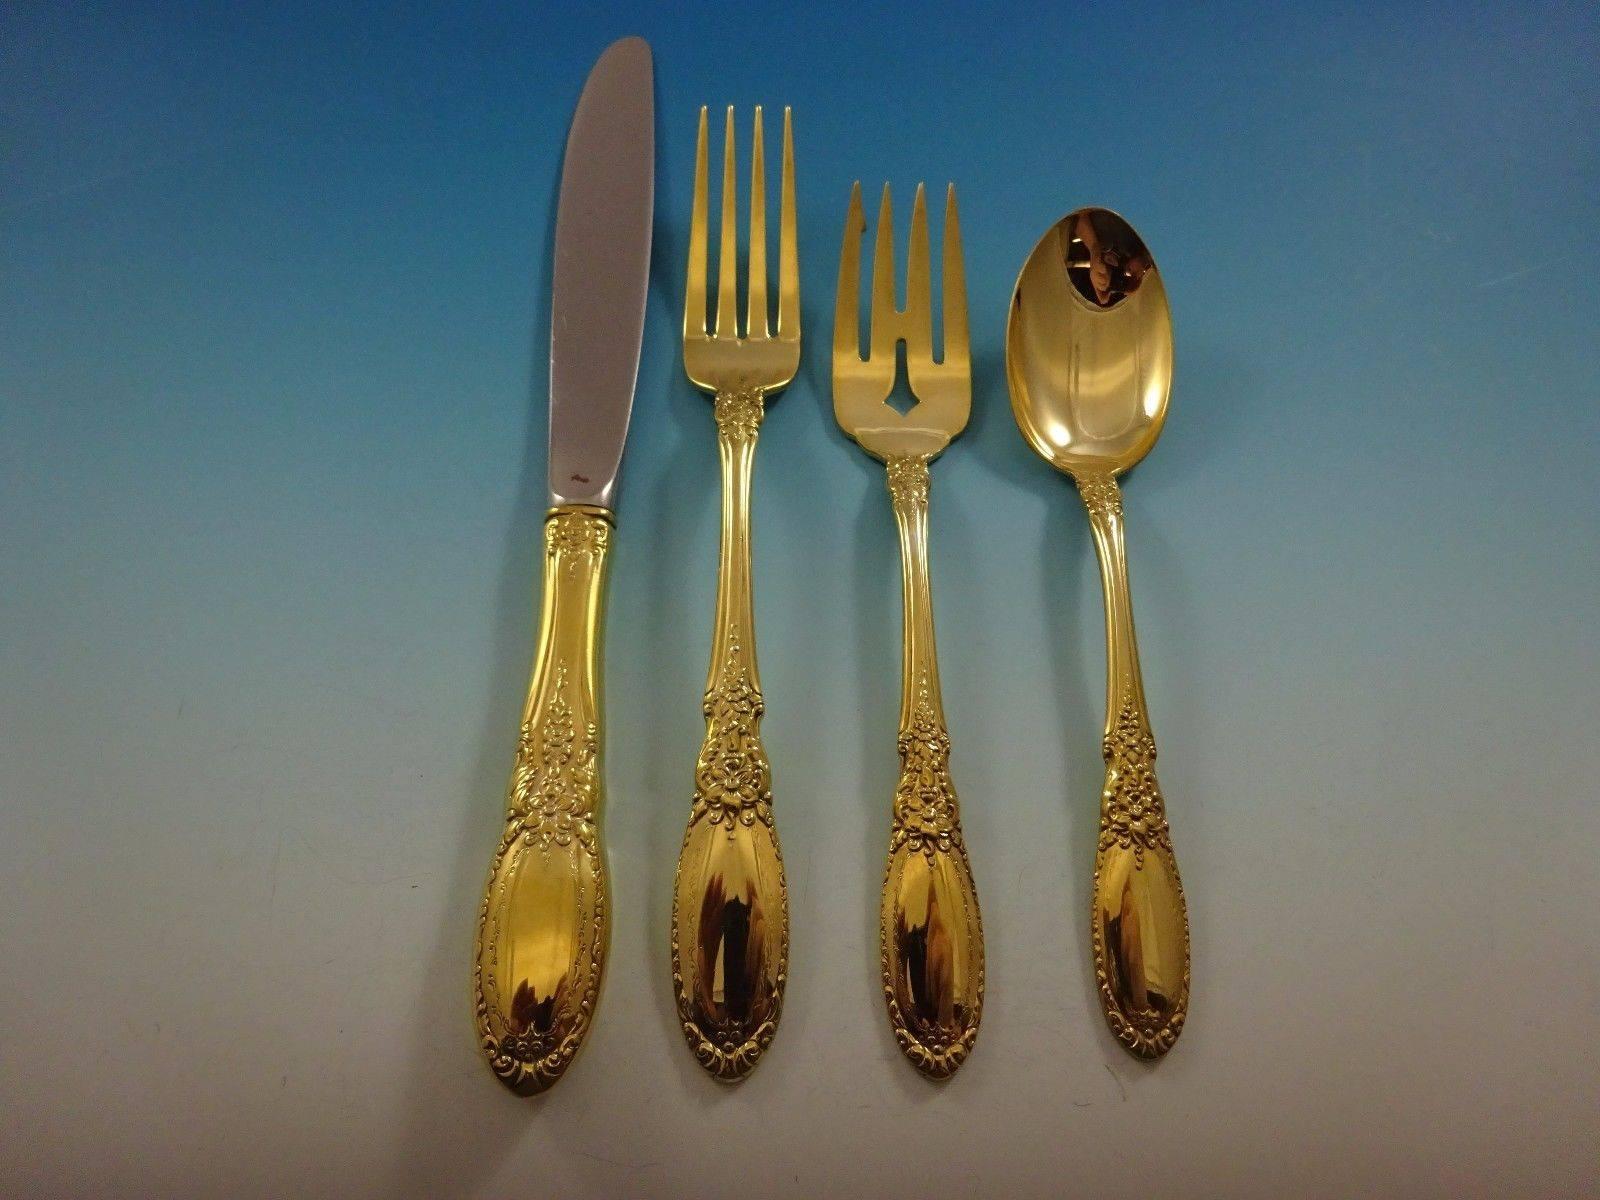 Old Mirror Gold by Towle Sterling Silver flatware set - 24 pieces. This set is vermeil (completely gold-washed) and includes: 

6 Knives, 8 5/8